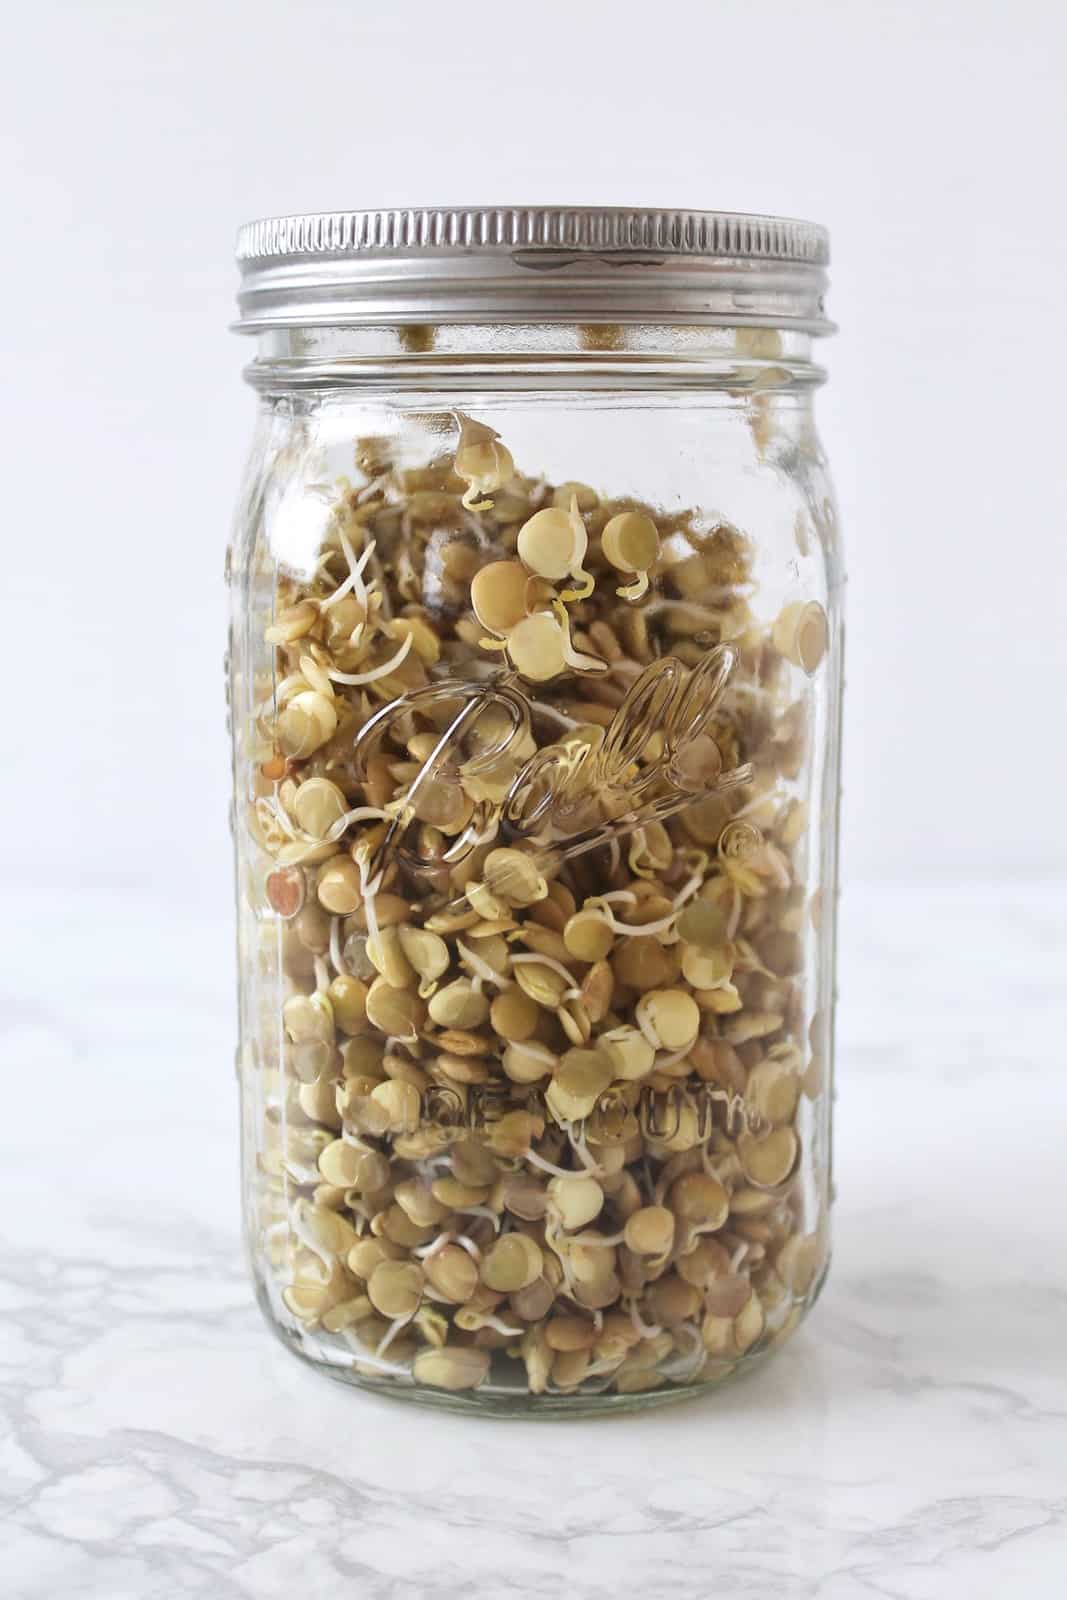 Clear mason jar filled with lentil sprouts on a white marble surface